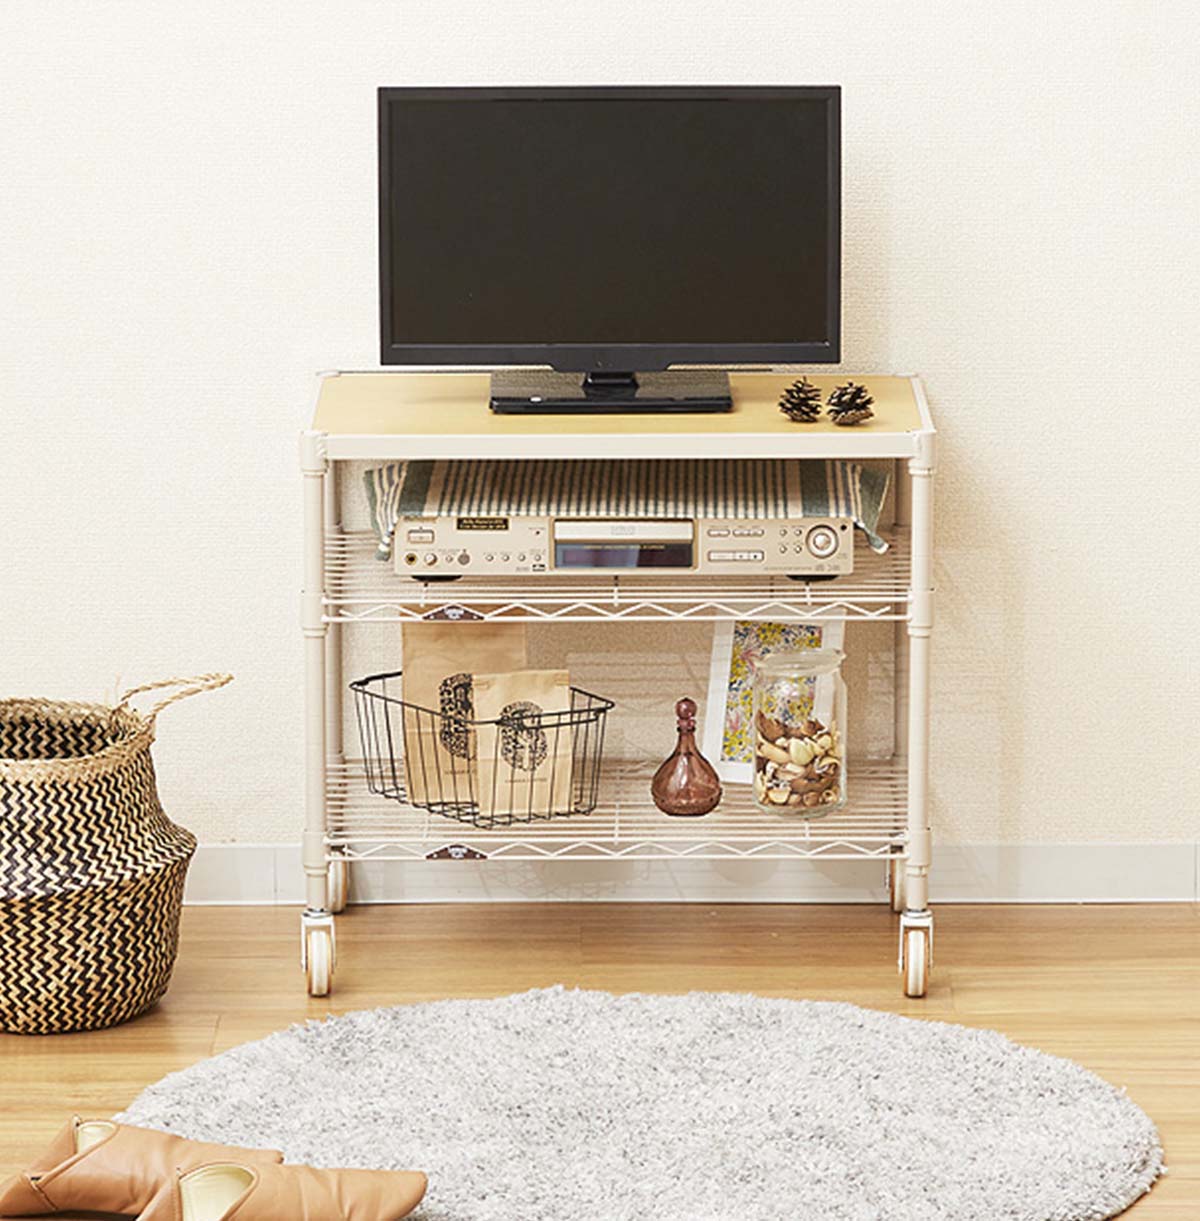 Mini TV Stand with Wood Top TV Console Table With Open Storage Shelves on Wheels 35-60